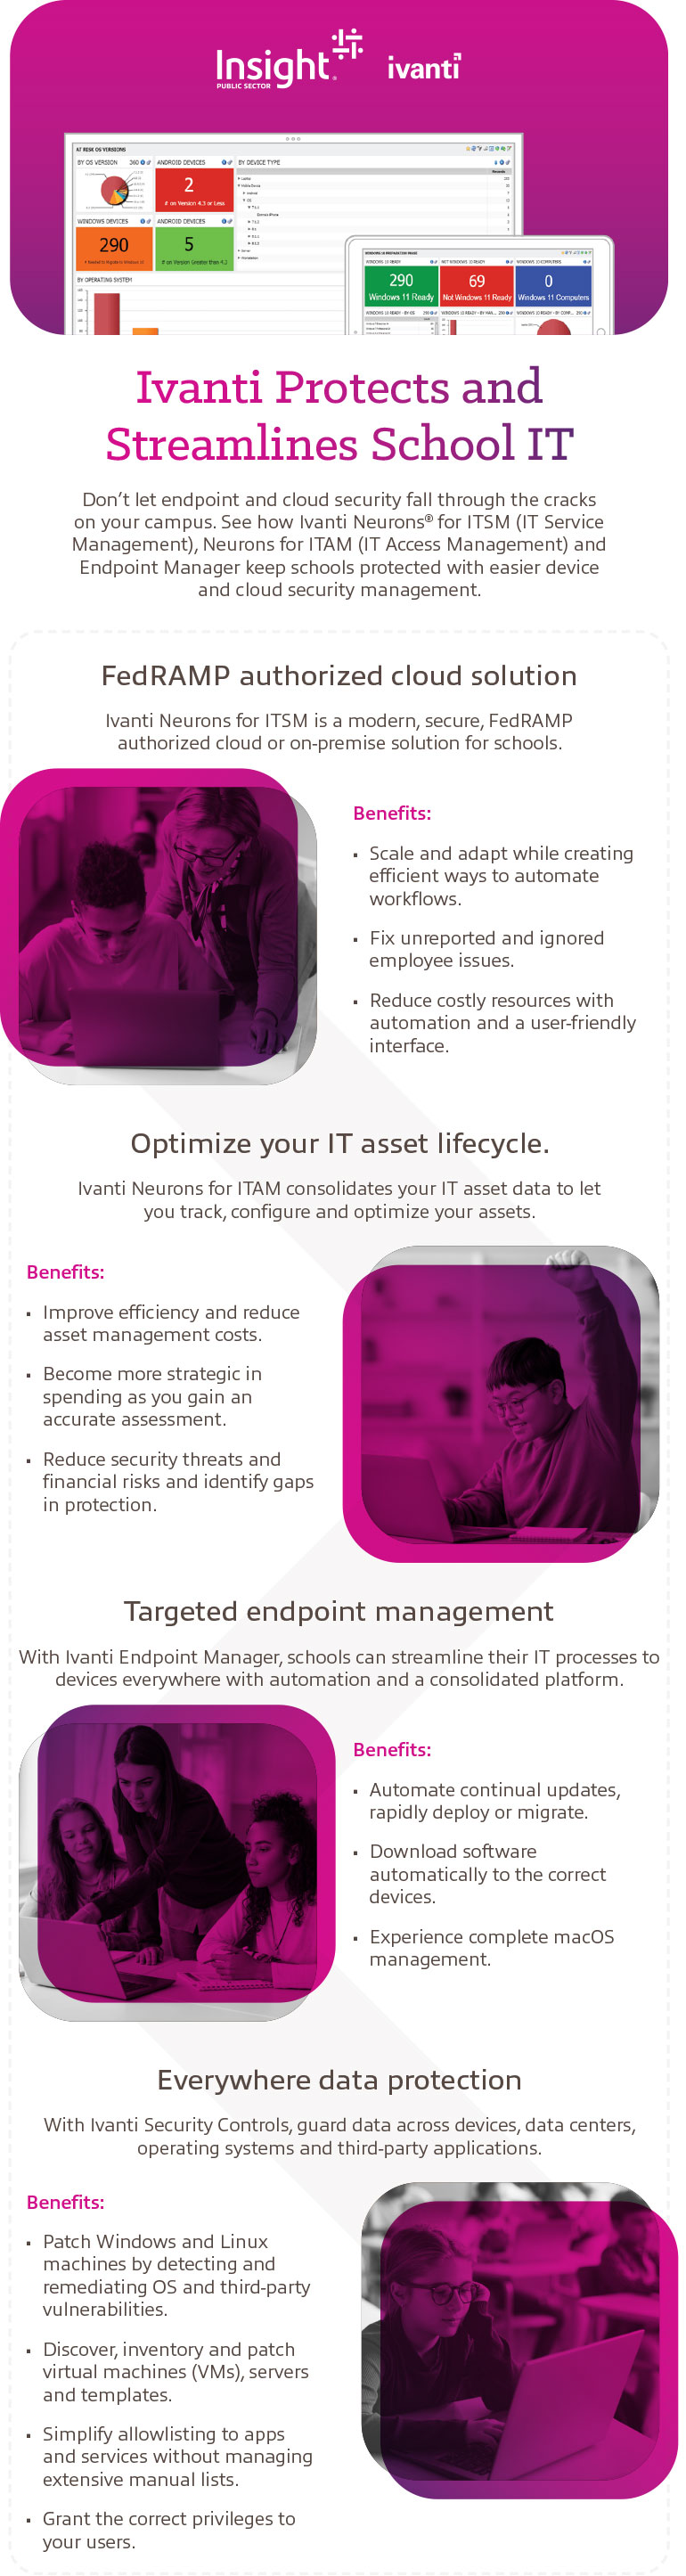 Manage and Secure School IT With Ivanti infographic as translated below.